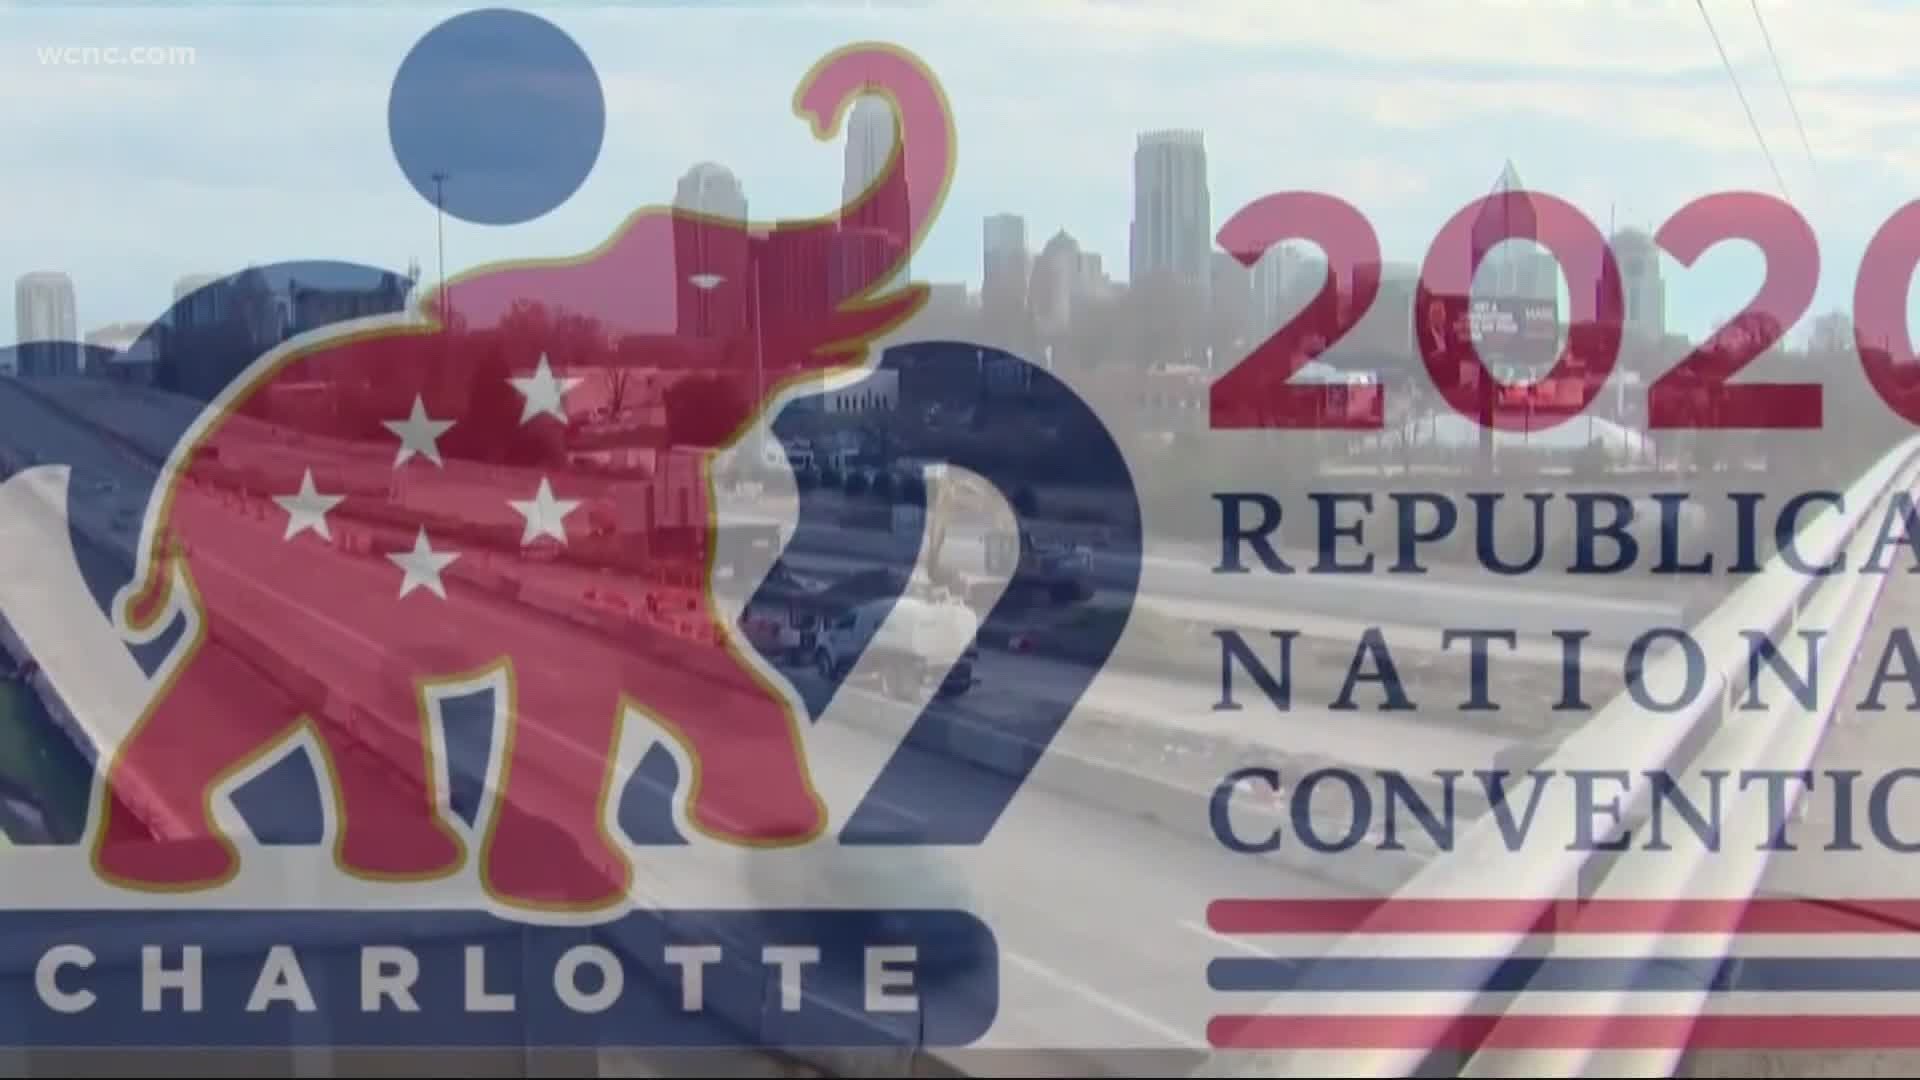 Just weeks away from the RNC, Charlotte is planning to host delegates, but it's not yet known where the President will give his acceptance speech.